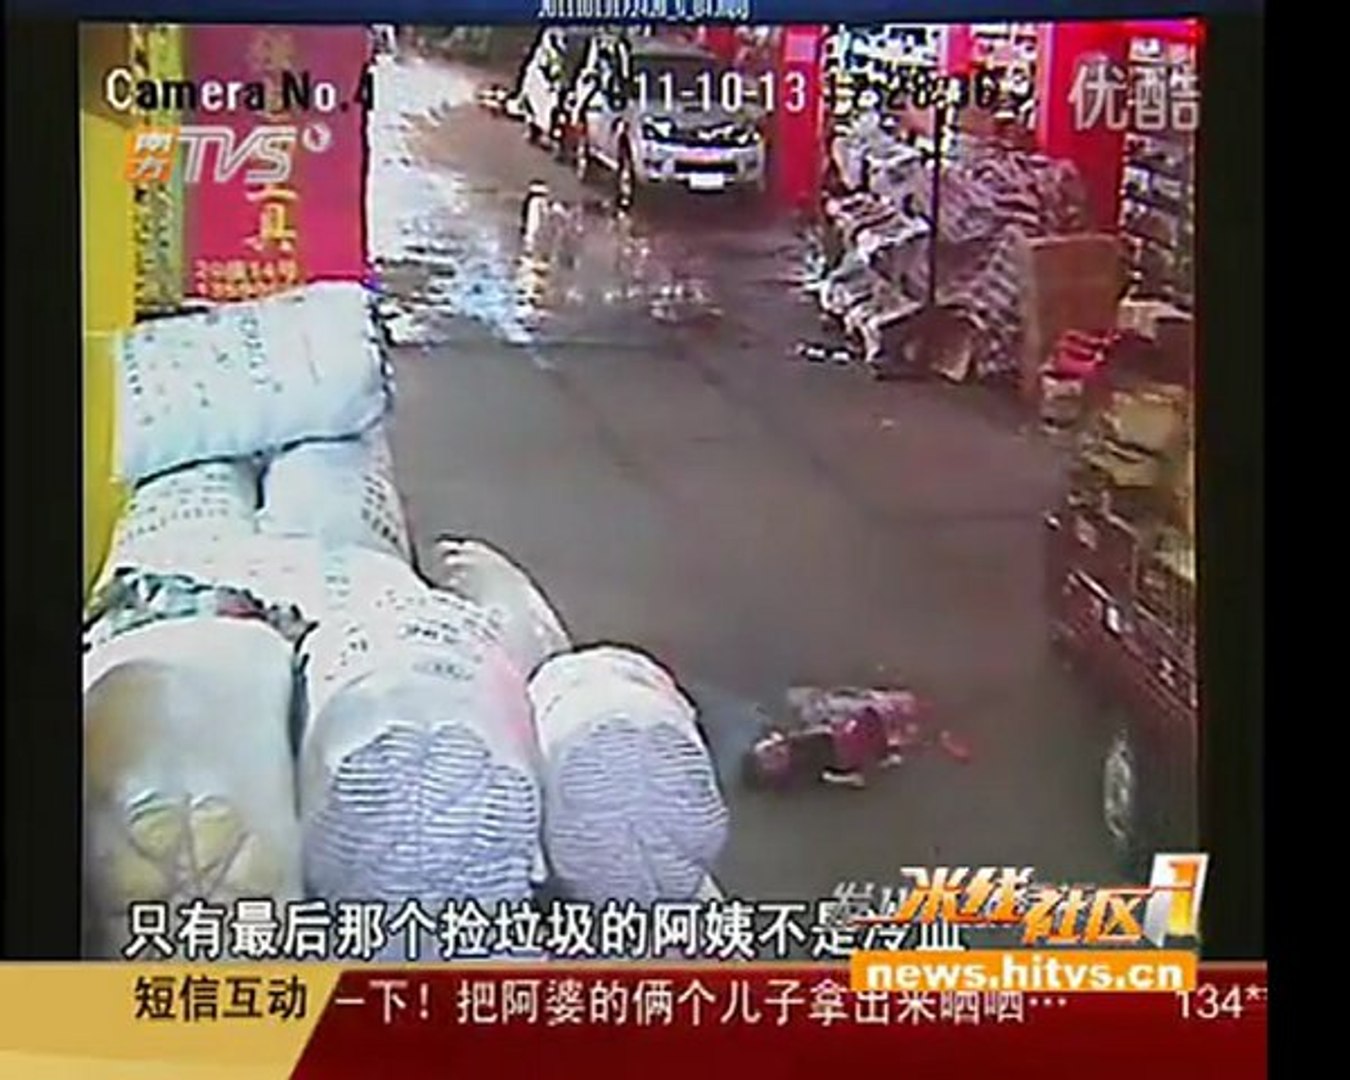 Chinese Toddler Wang Yue Tragic Death - Video Dailymotion